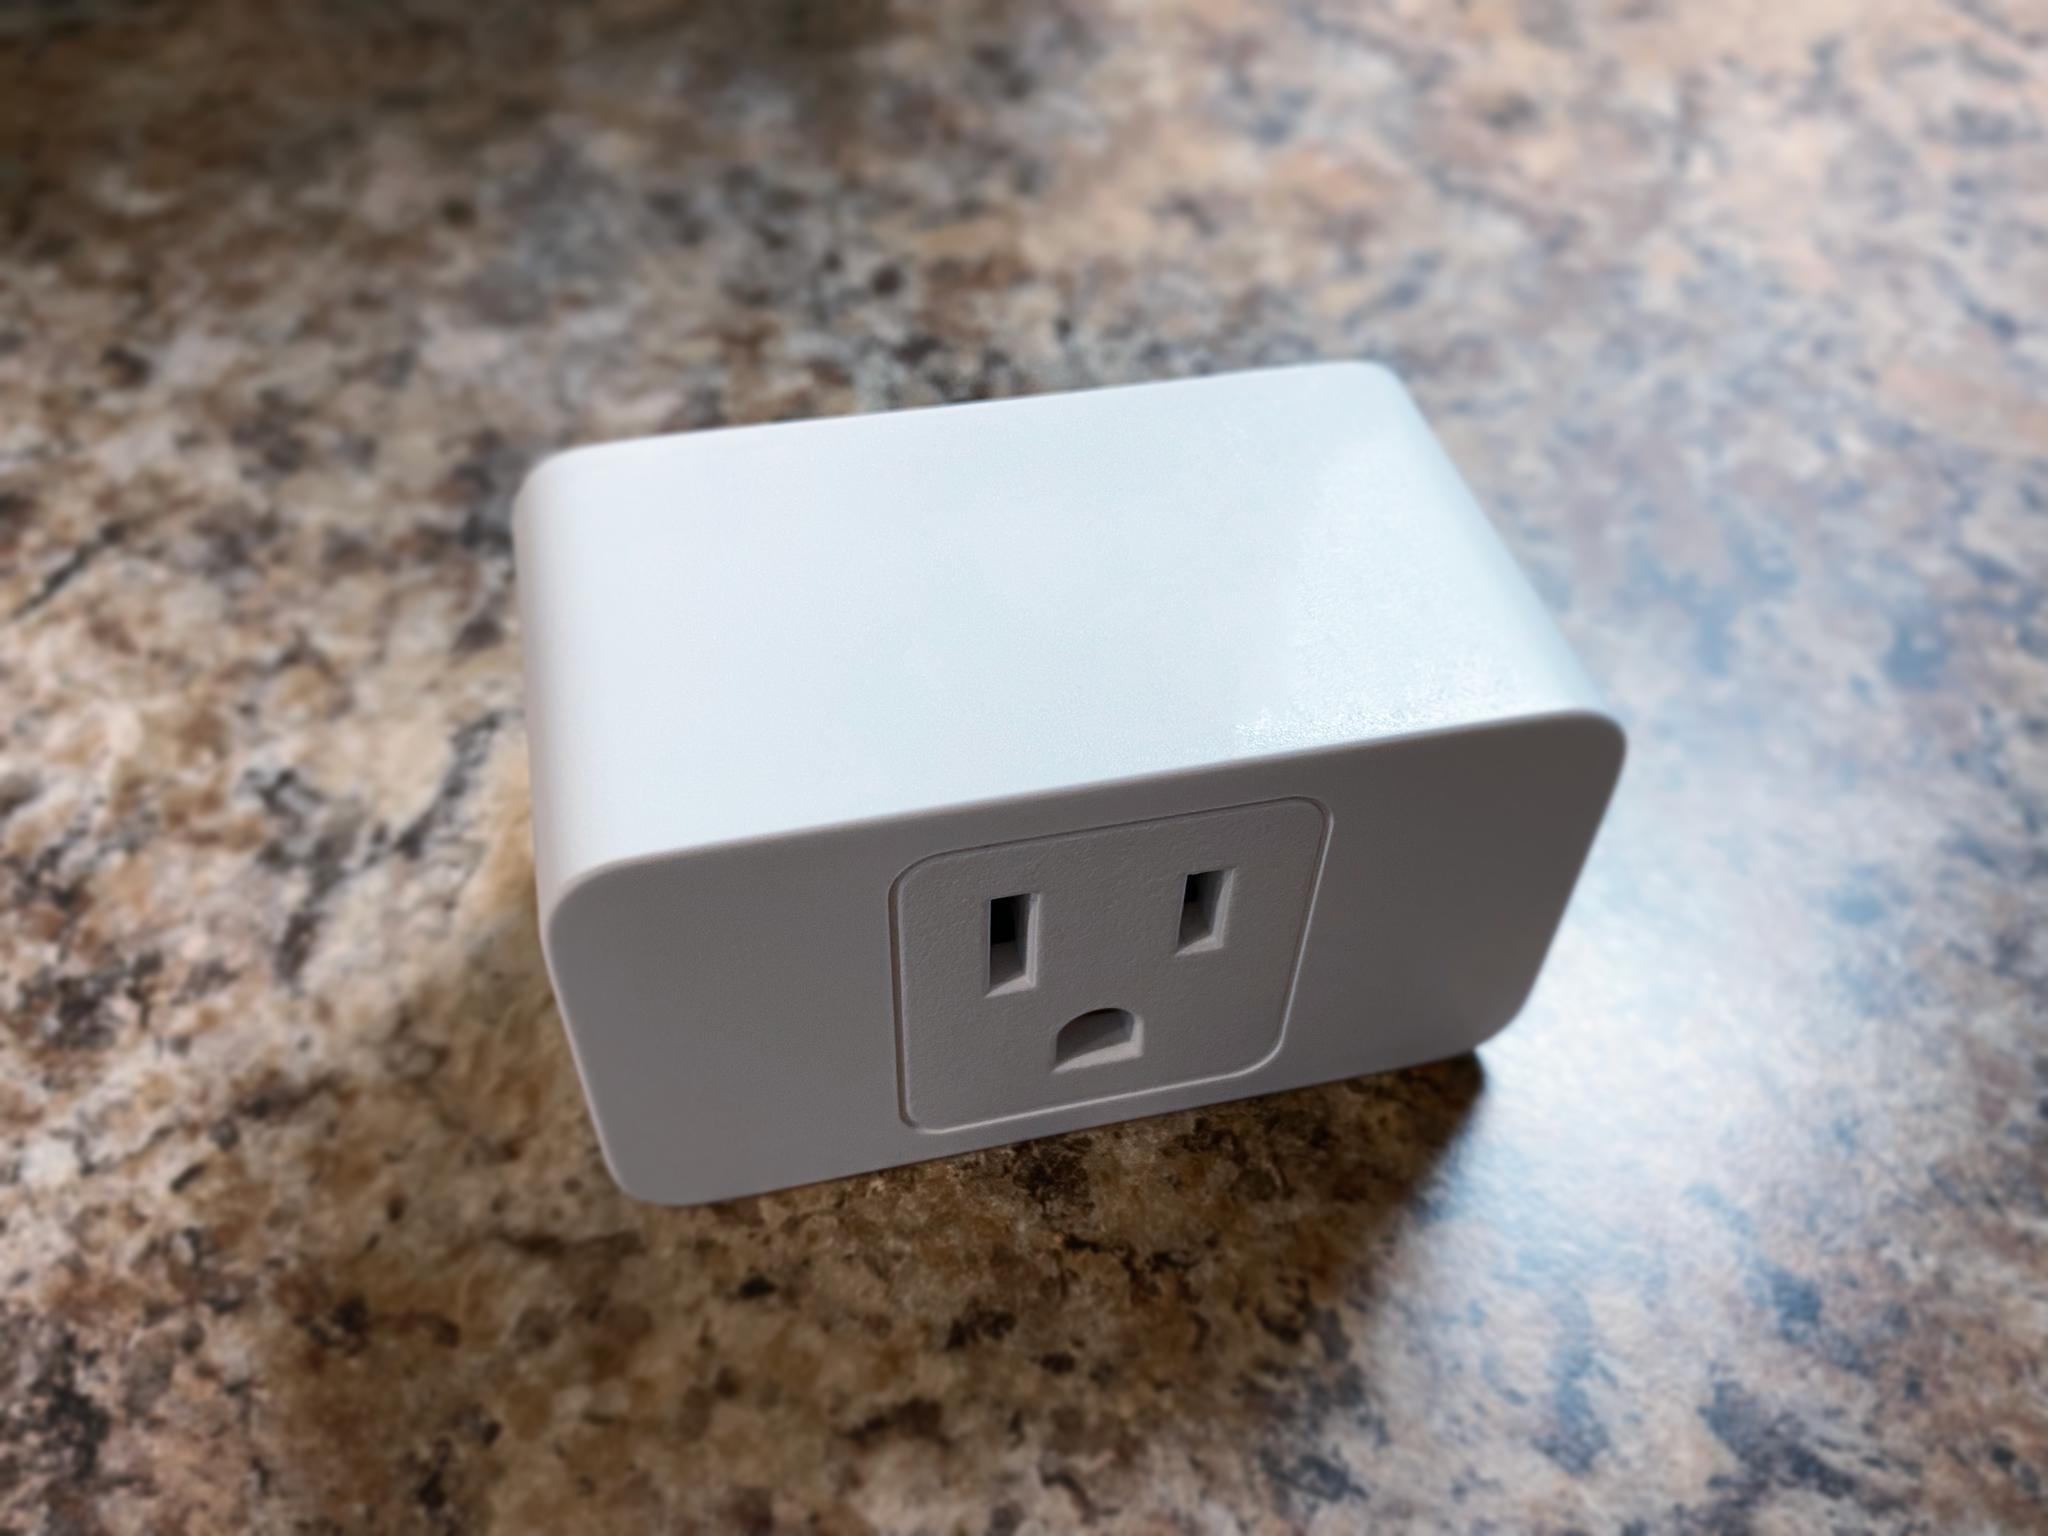 Meross Outdoor Smart Plug review: A capable, if basic outdoor plug